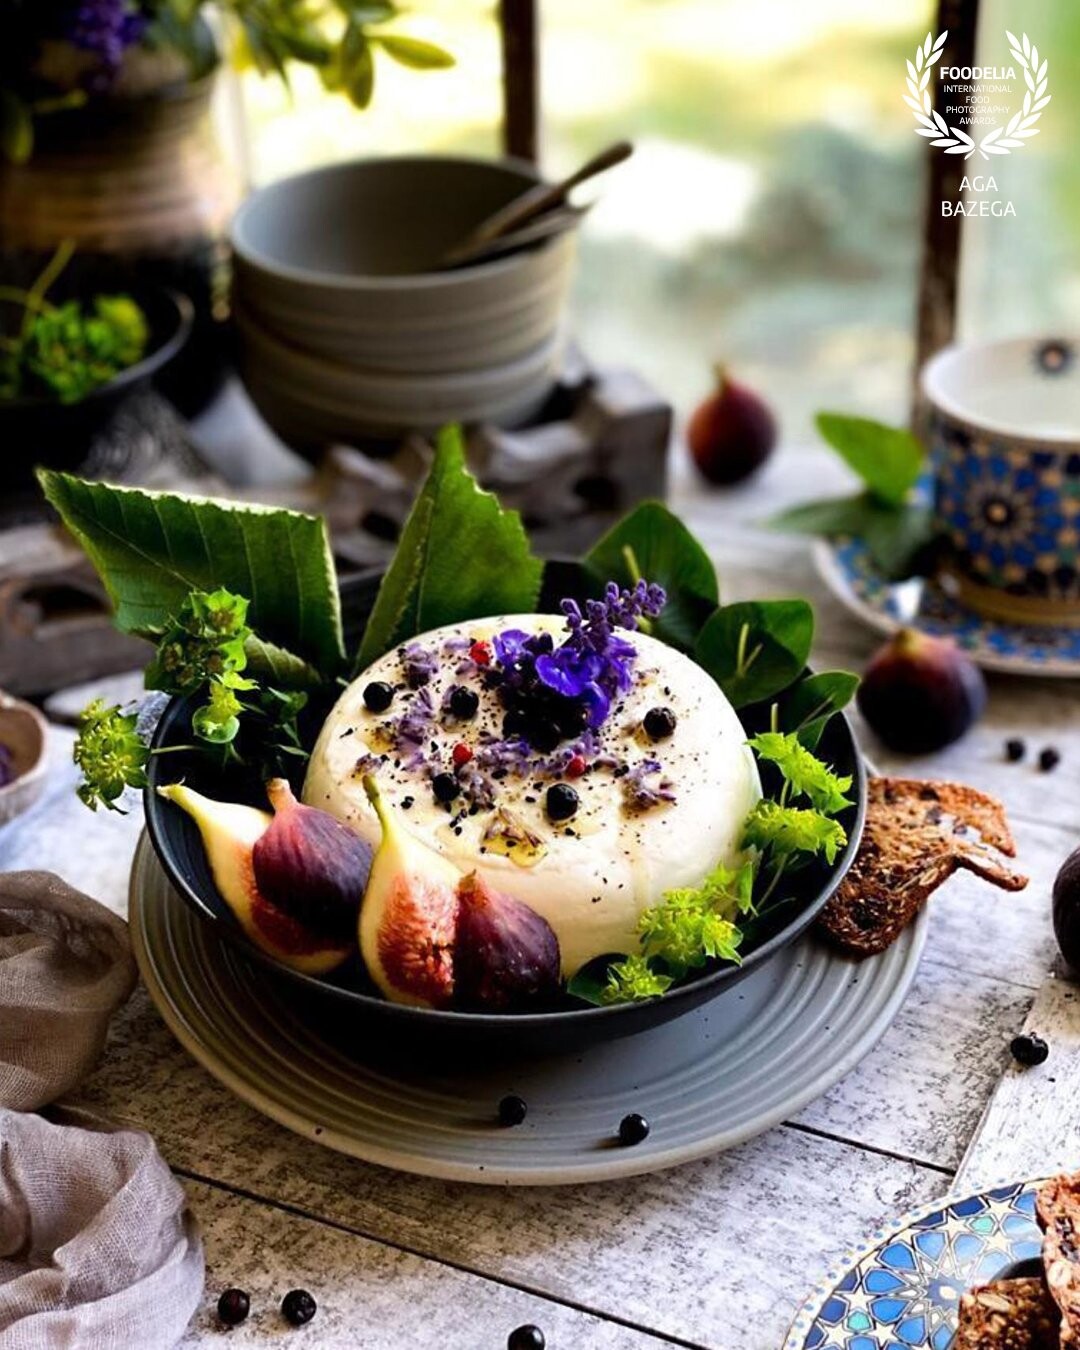 Baked goat cheese with fresh figs, herbs and salvia flowers. Image created for photography contest. That appetizer was shot in my studio, using back lighting.